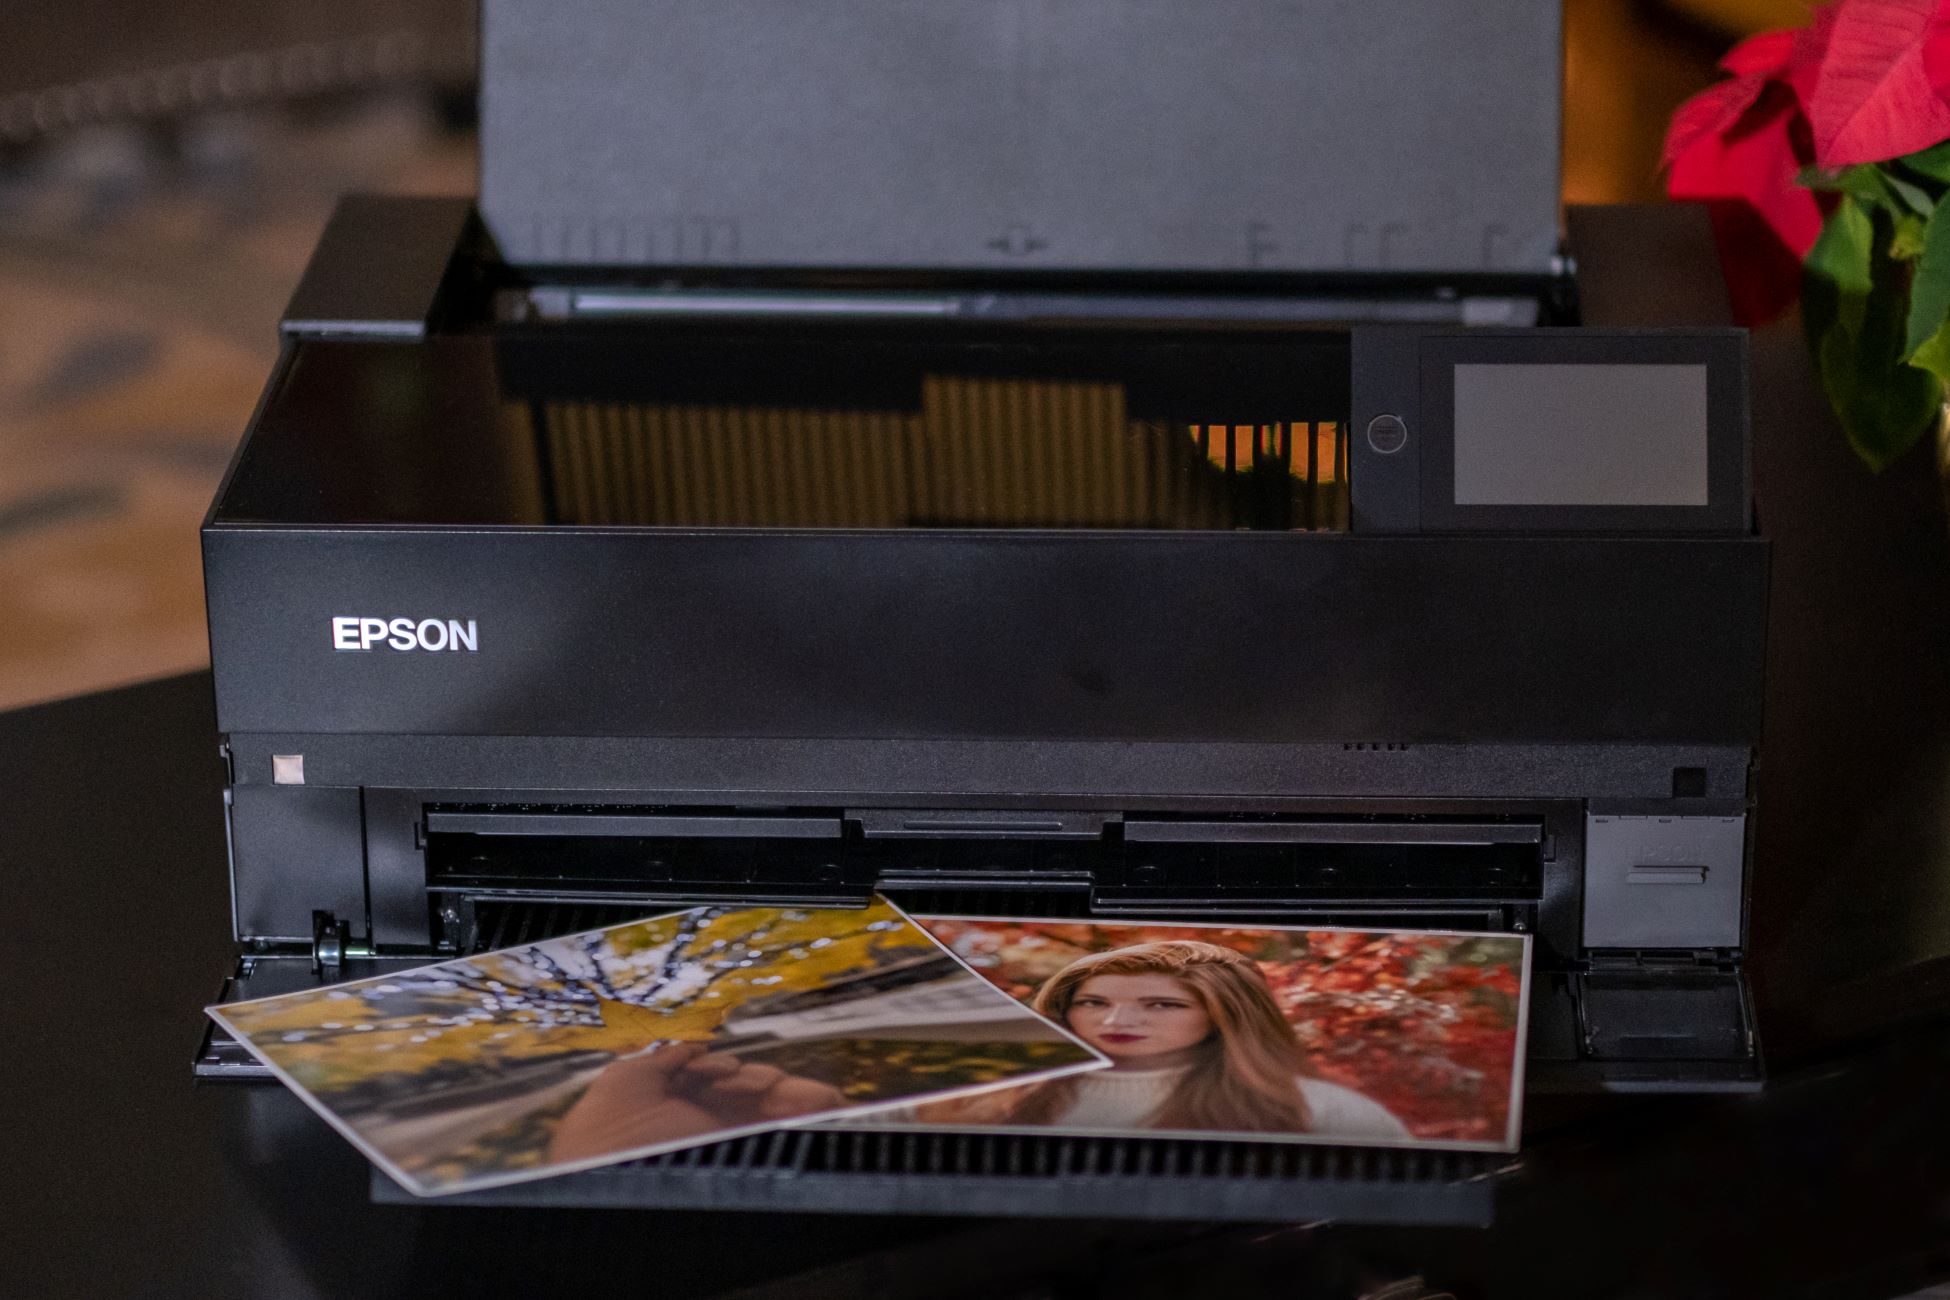 How To Configure Email Server On Epson Printer